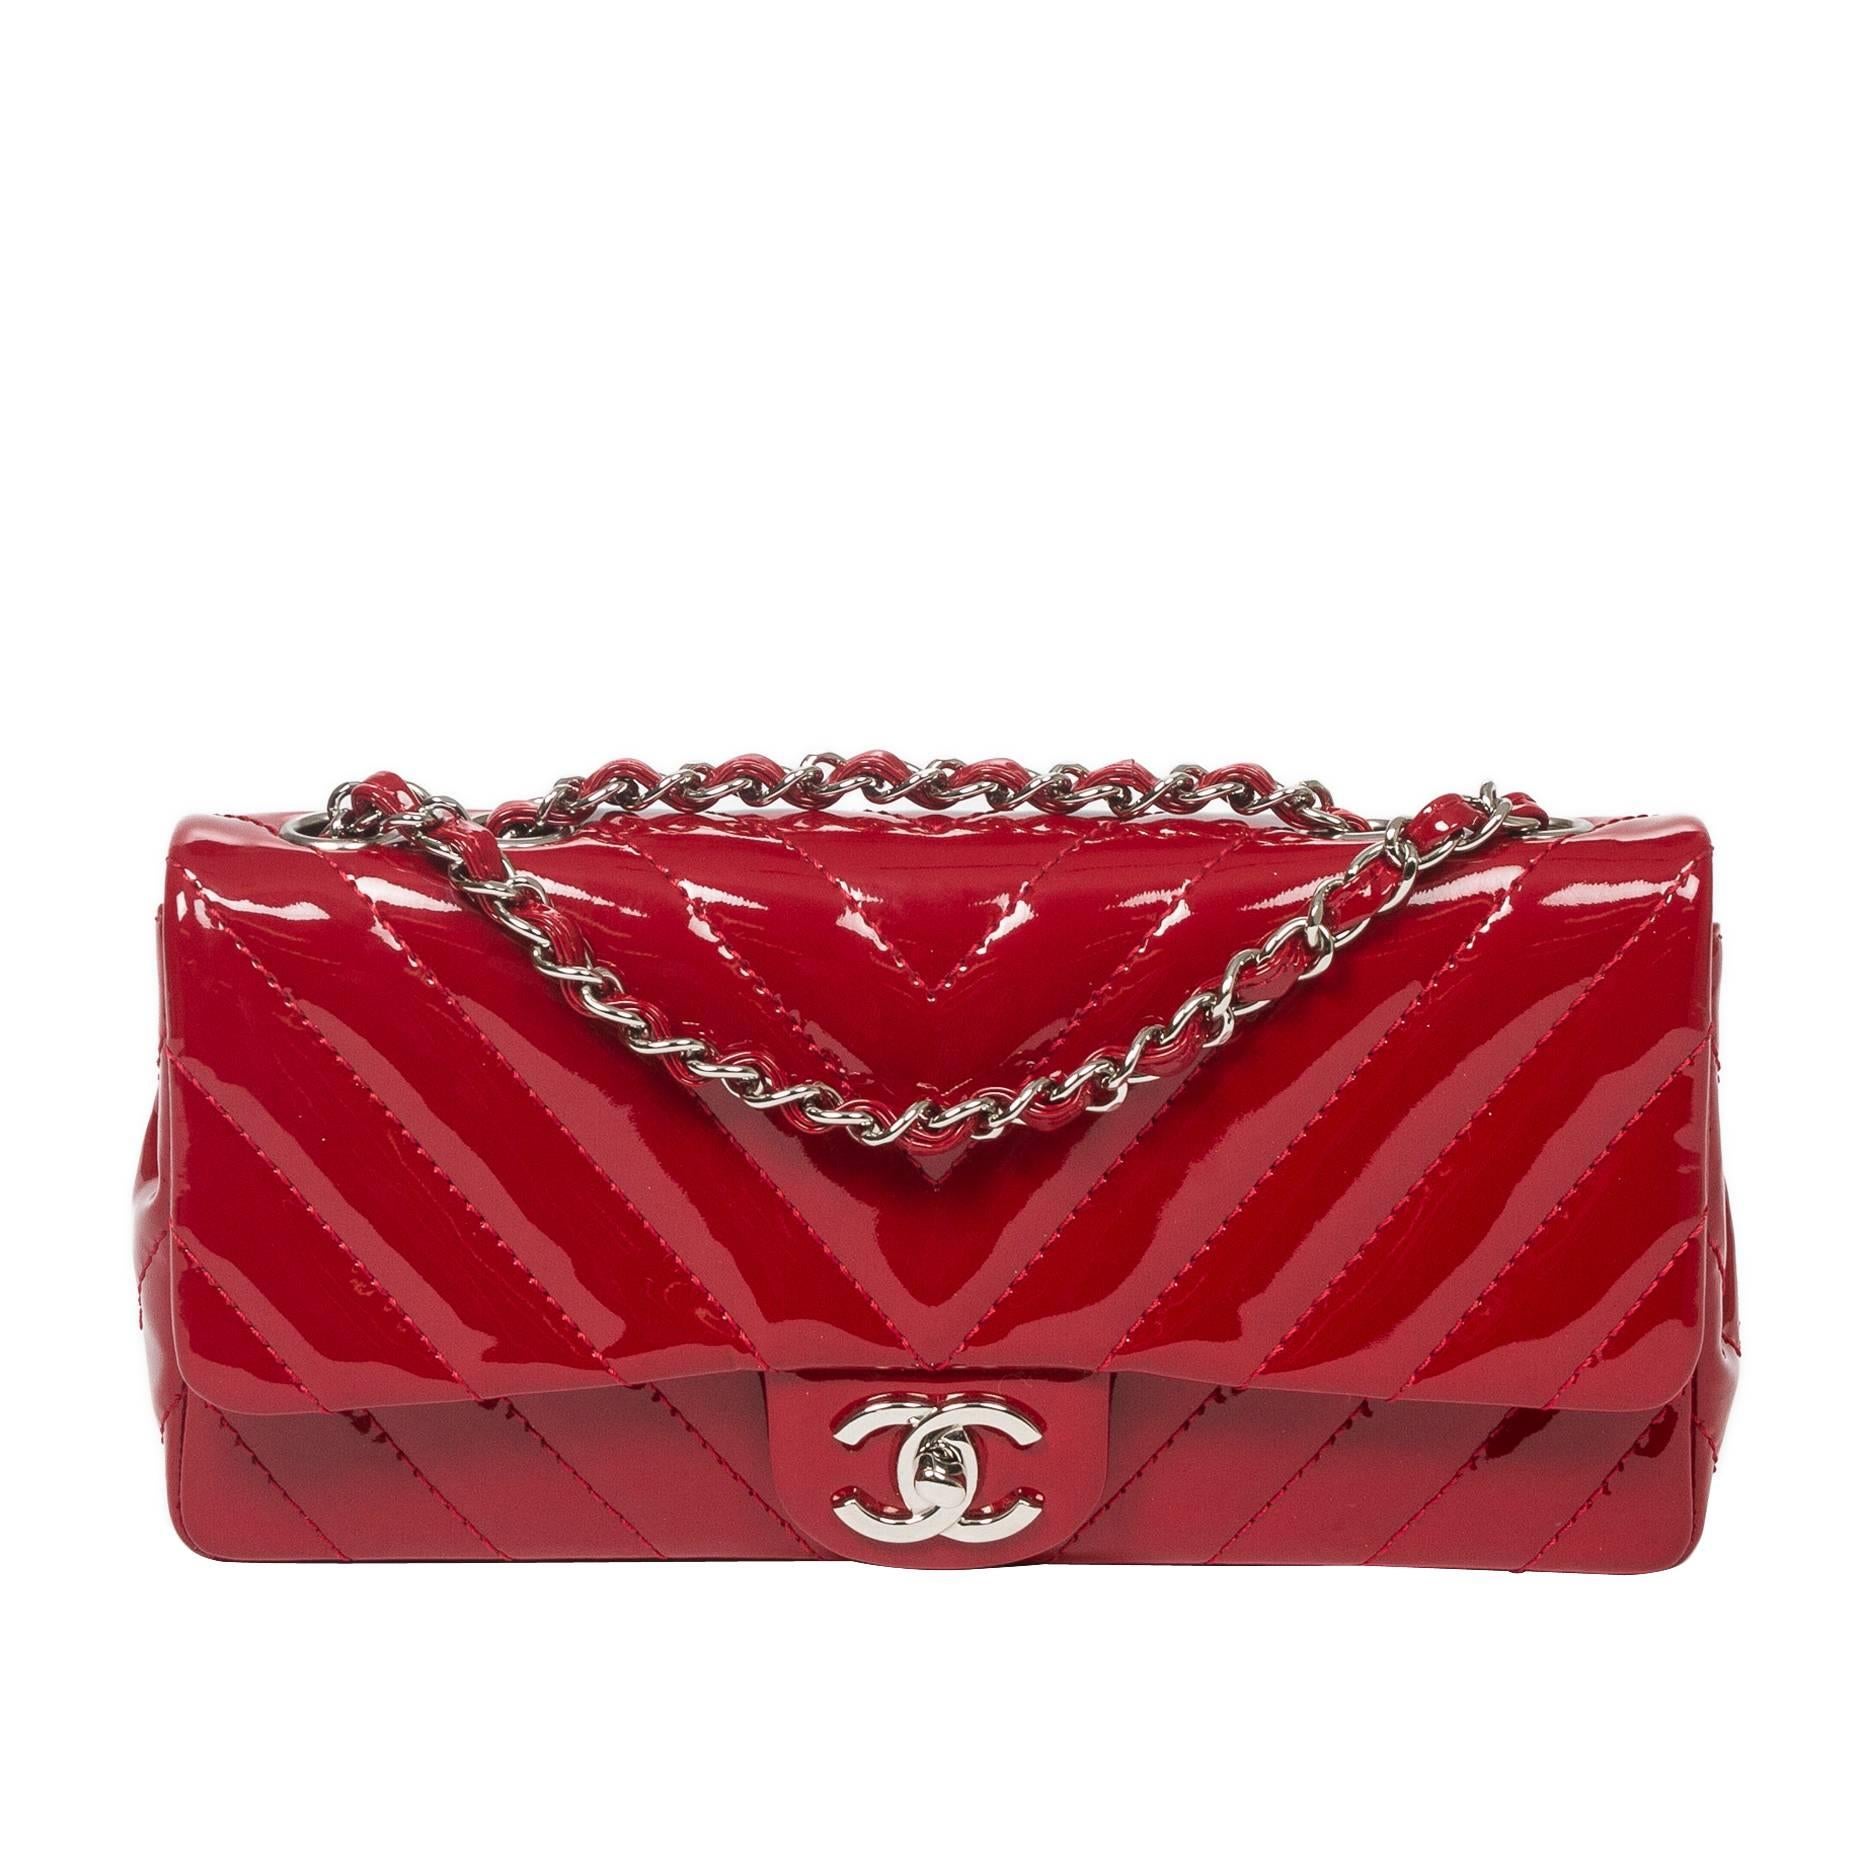 Chanel - East West Flap Red Chevron Quilted Patent Leather